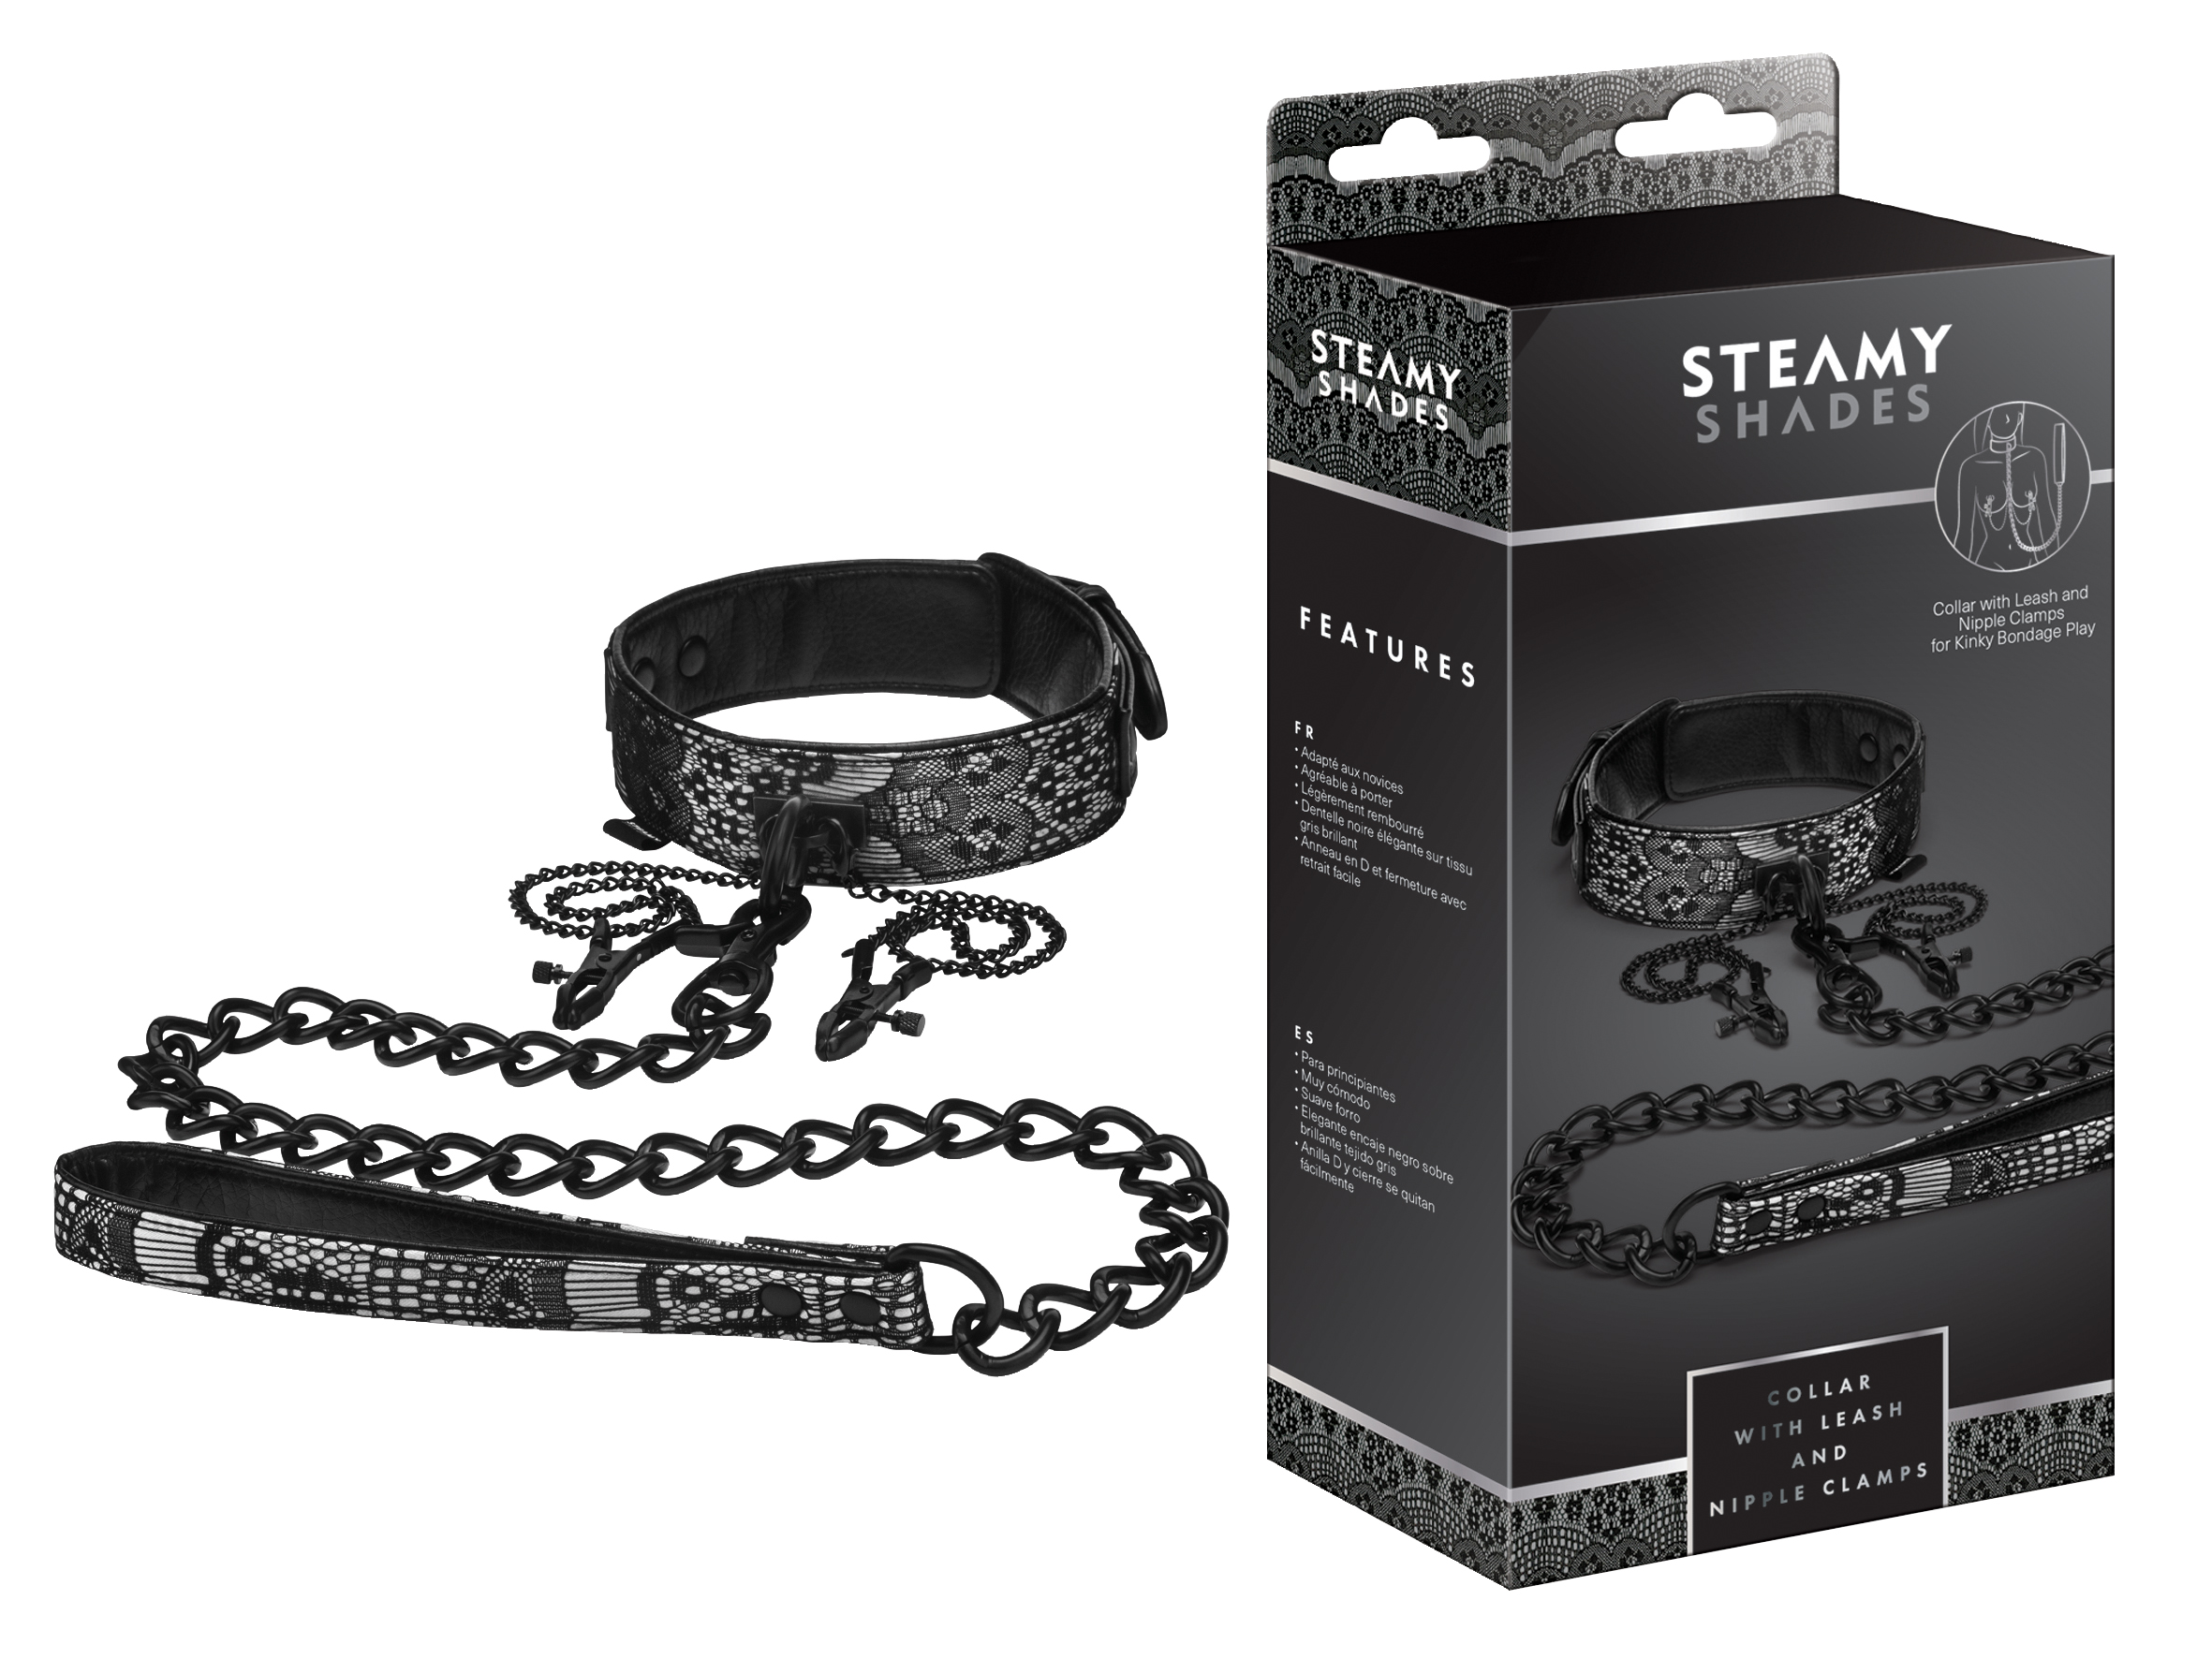 STEAMY SHADES Collar with Leash and Nipple Clamps